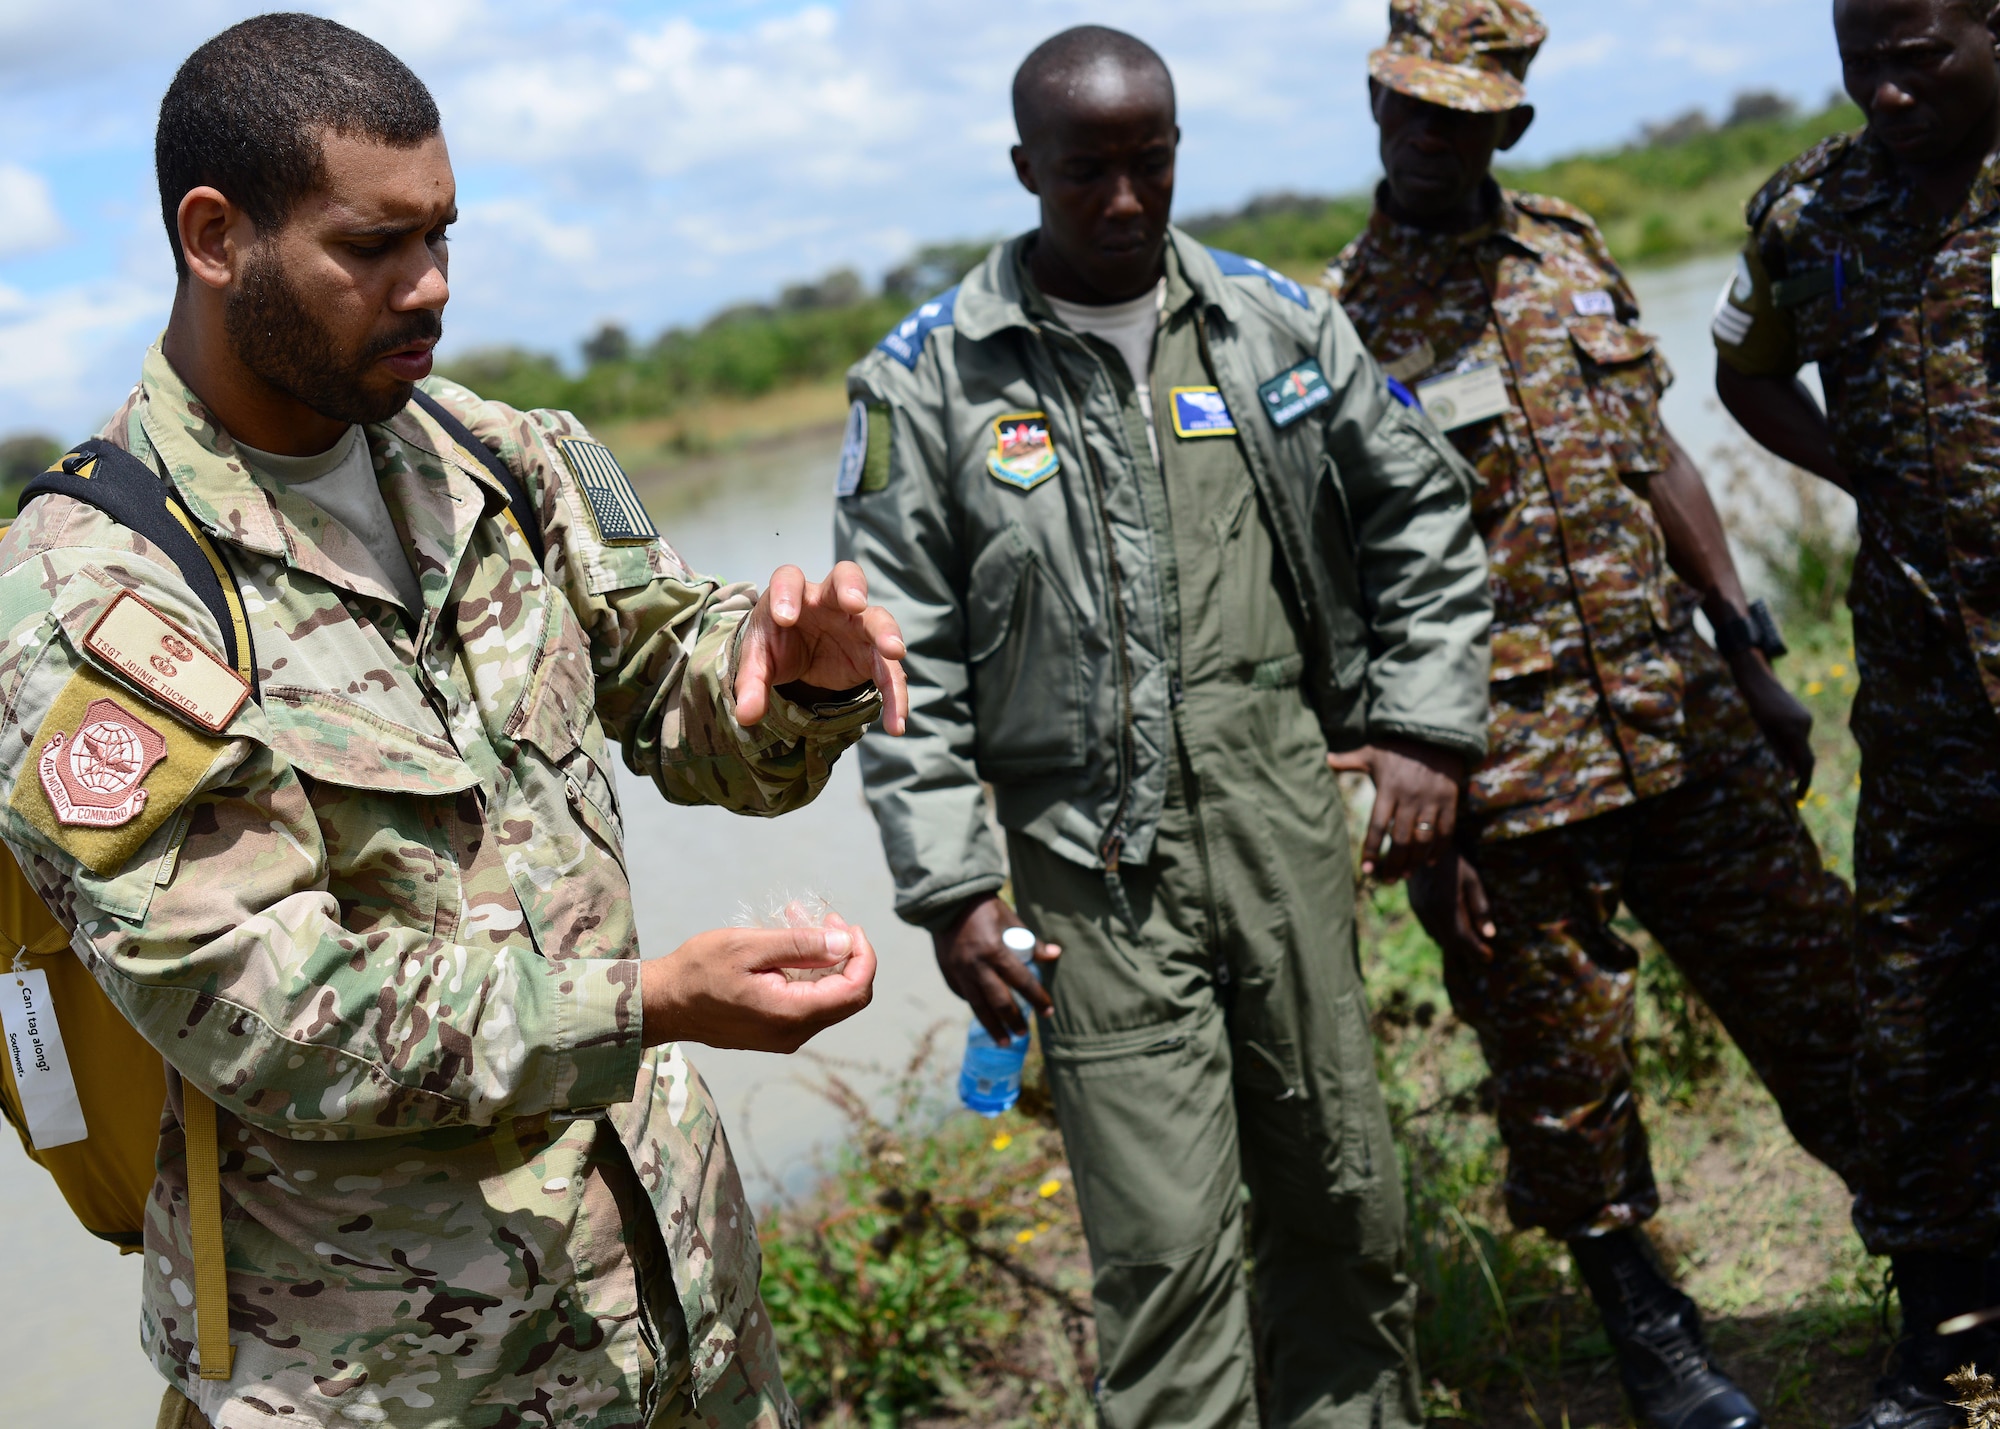 U.S. Air Force Tech. Sgt. Johnie Tucker, 818th Mobility Support Advisory Squadron survival evasion resistance and escape specialist air advisor, discusses survival techniques with Kenyan Defense Force members at Laikipia Air Base, Kenya, June 23, 2016. More than 50 U.S. Air Force Airmen participated in the first African Partnership Flight in Kenya. The APF is designed for U.S. and African partner nations to work together in a learning environment to help build expertise and professional knowledge and skills in key areas such as personnel recovery command and control, survival and evasion principles and tactical combat casualty care. (U.S. Air Force photo by Tech. Sgt. Evelyn Chavez/Released)